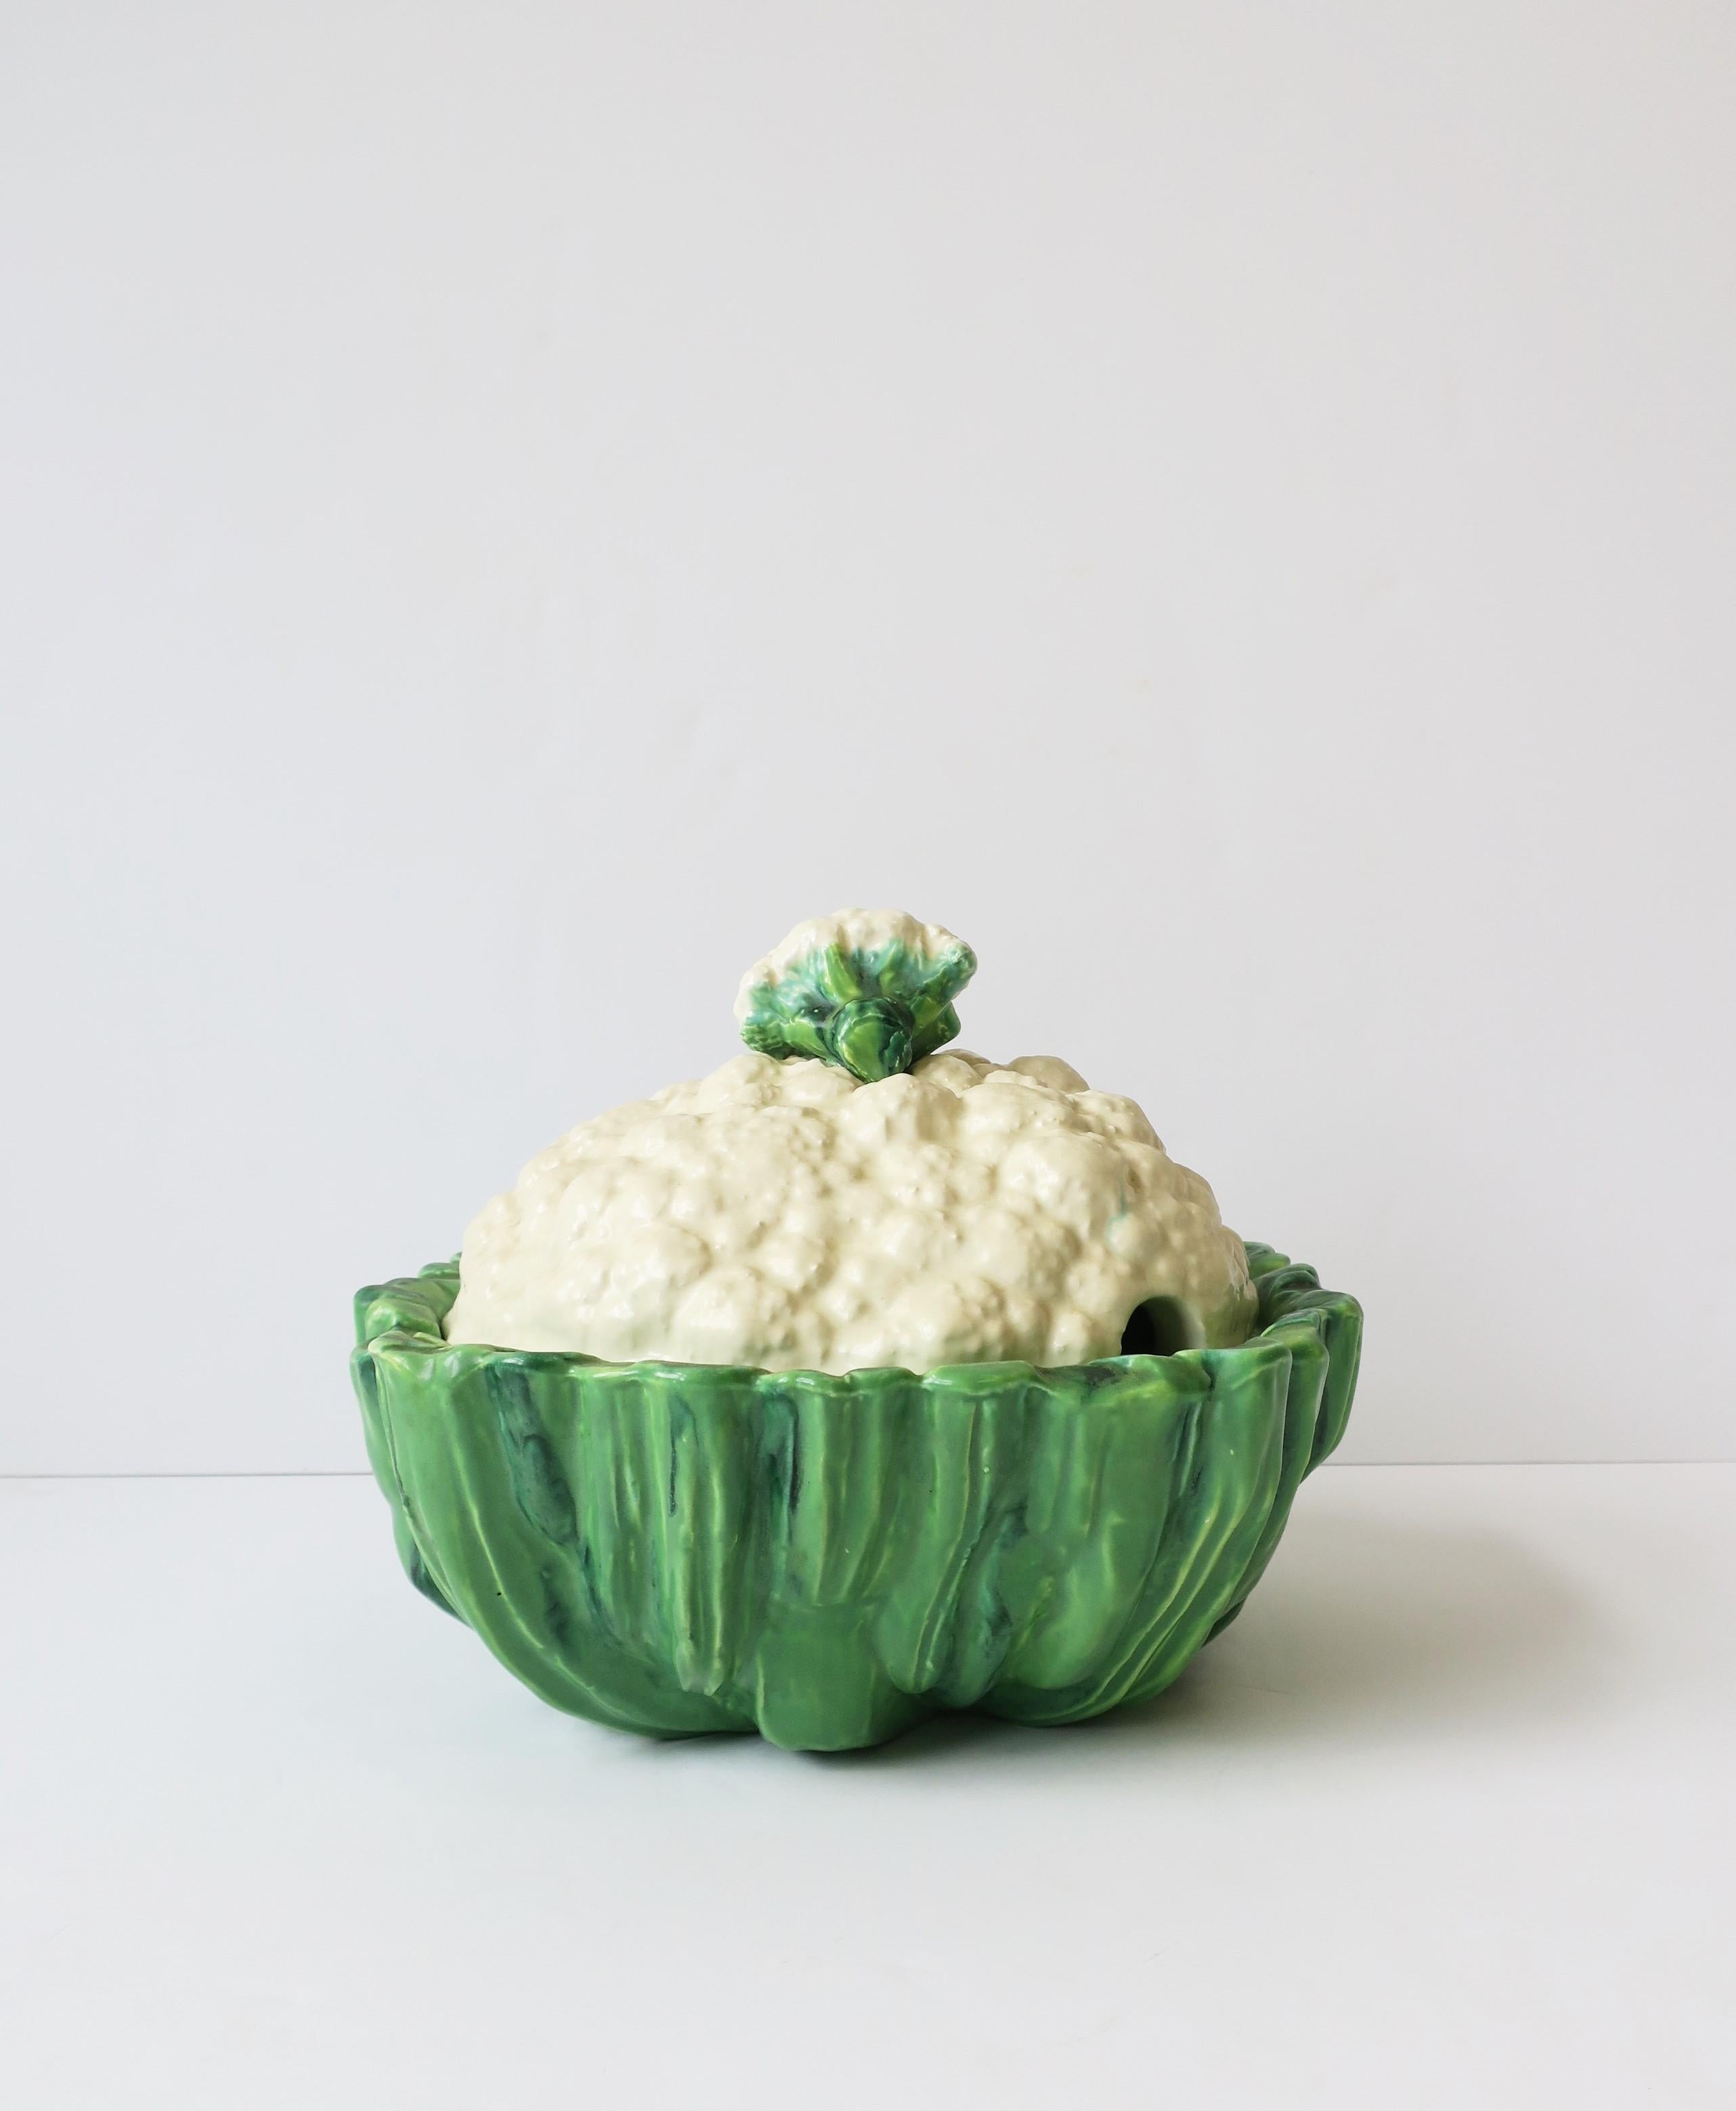 Cabbage Cauliflower Vegetable Soup Tureen Bowl in White and Green In Good Condition For Sale In New York, NY